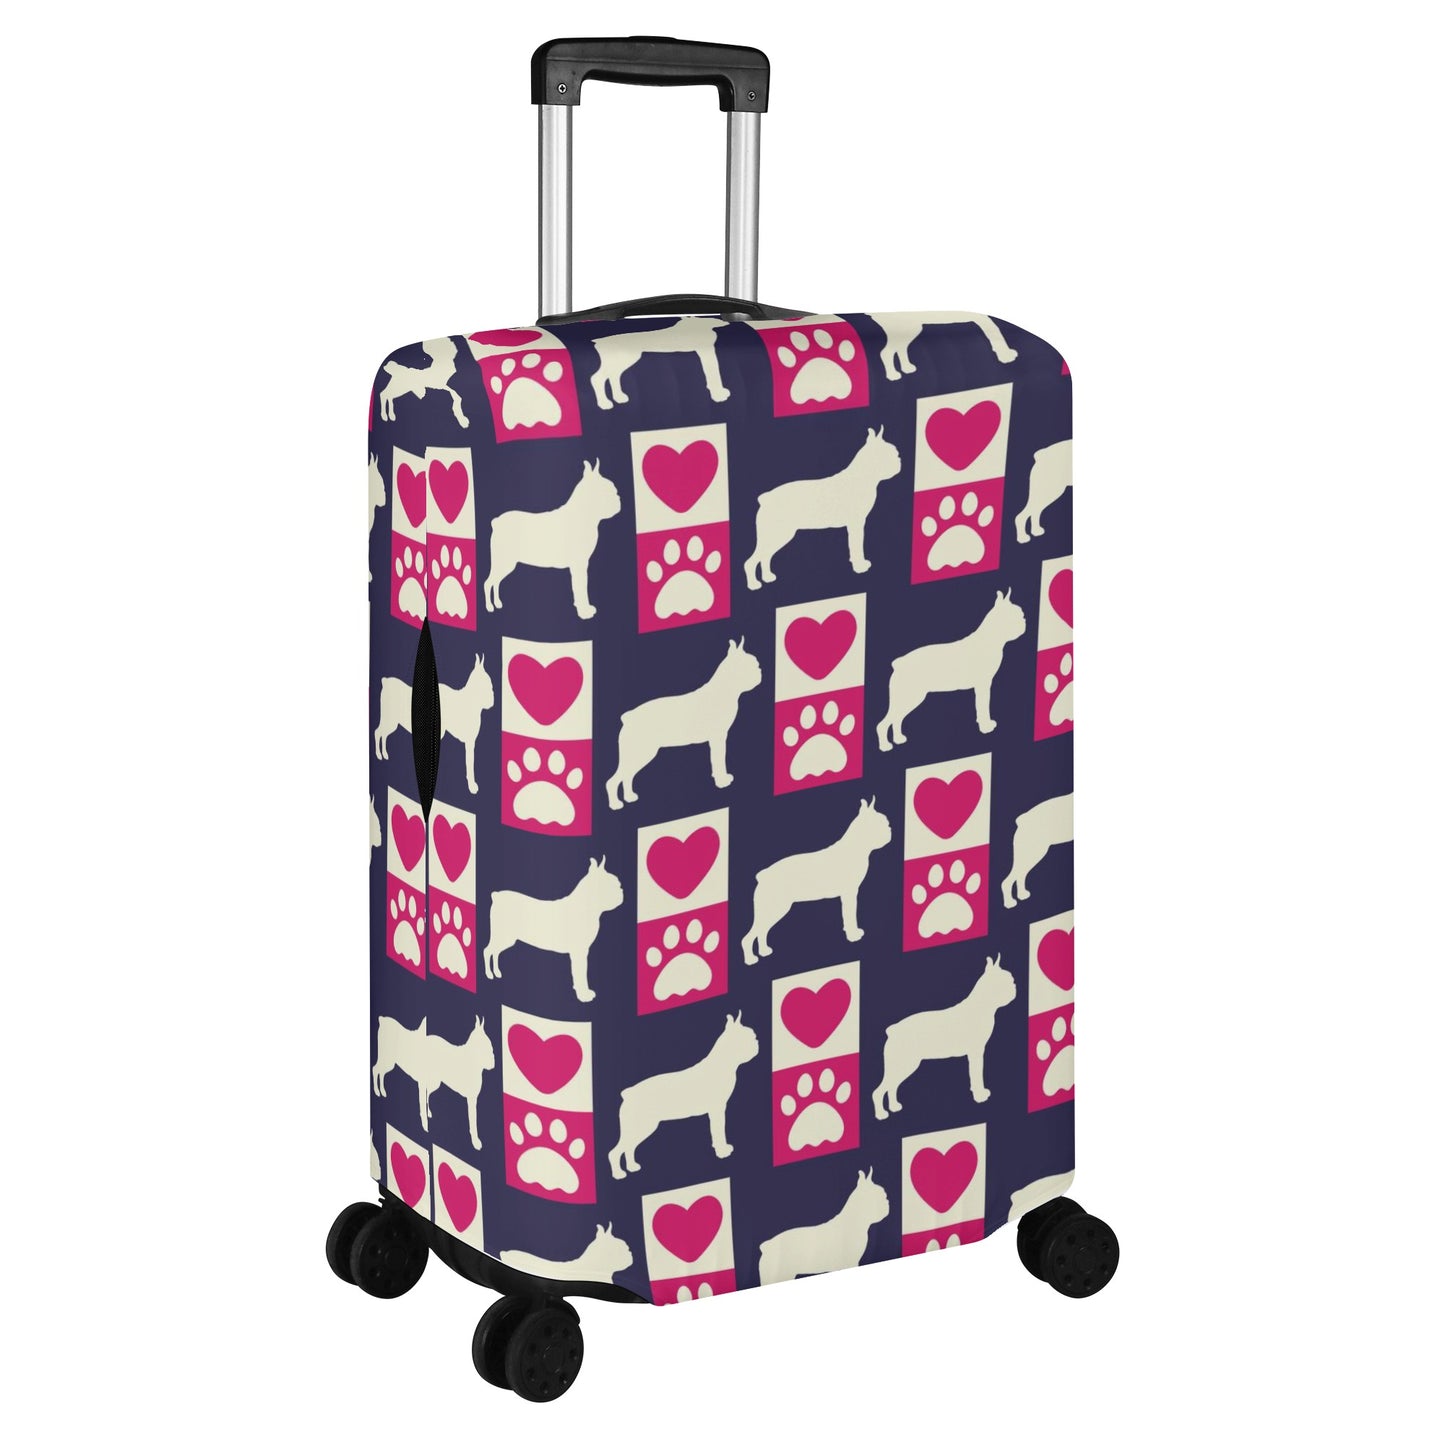 Rusty - Luggage Cover for Boston Terrier lovers